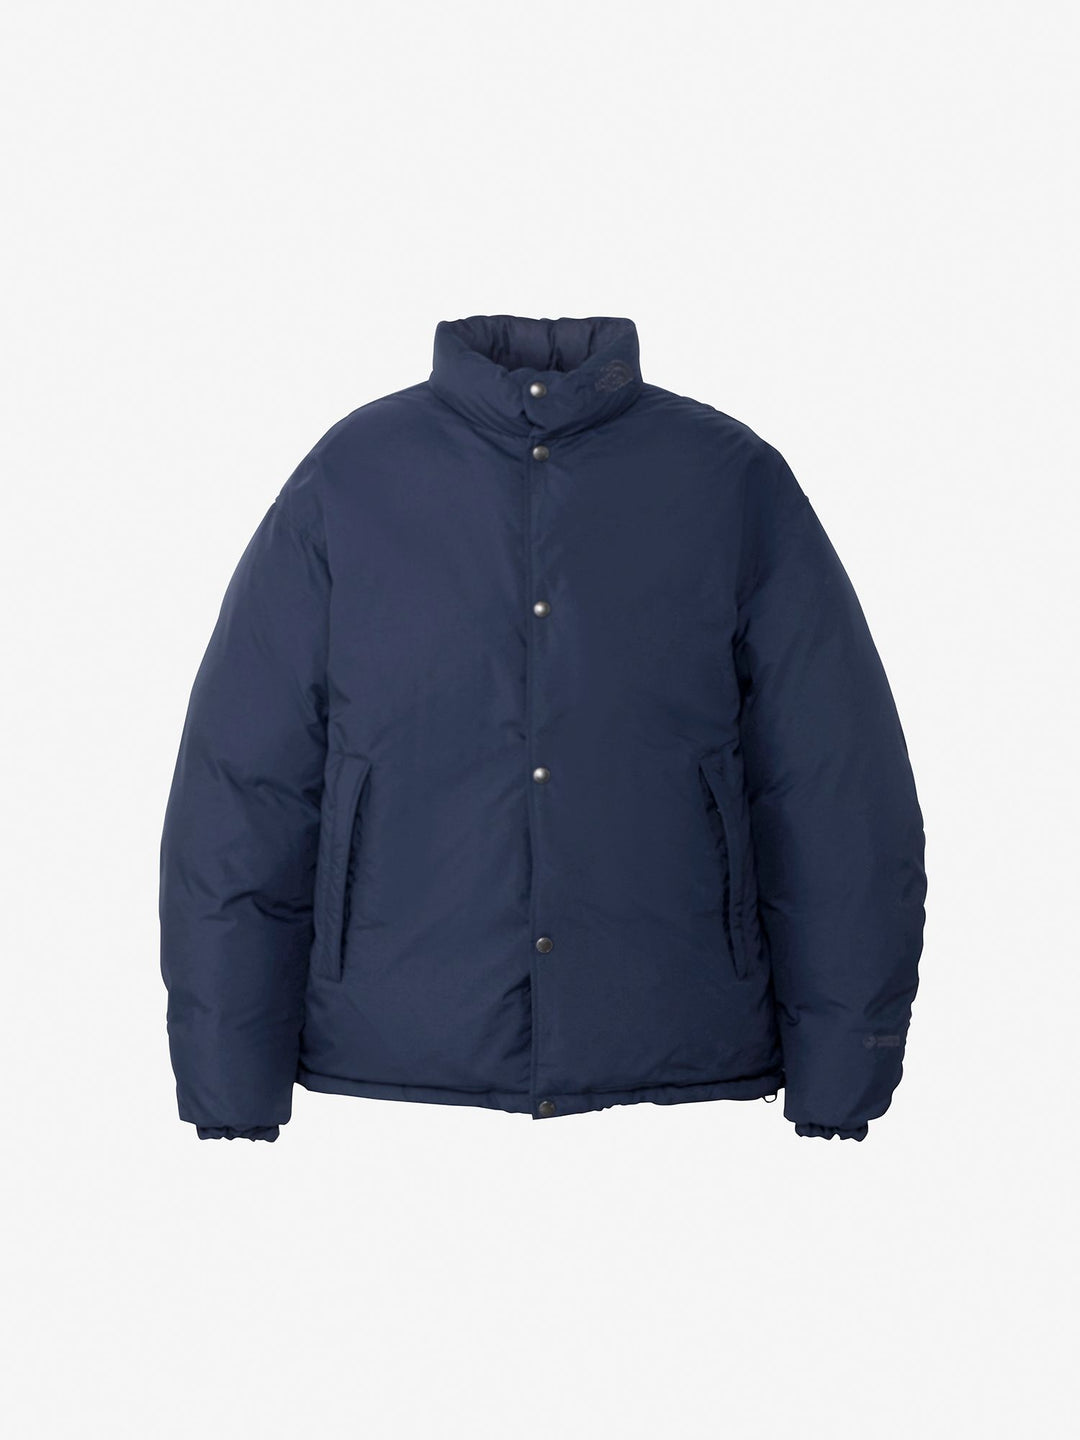 THE NORTH FACE/UNISEX　Alteration Sierra Jacket